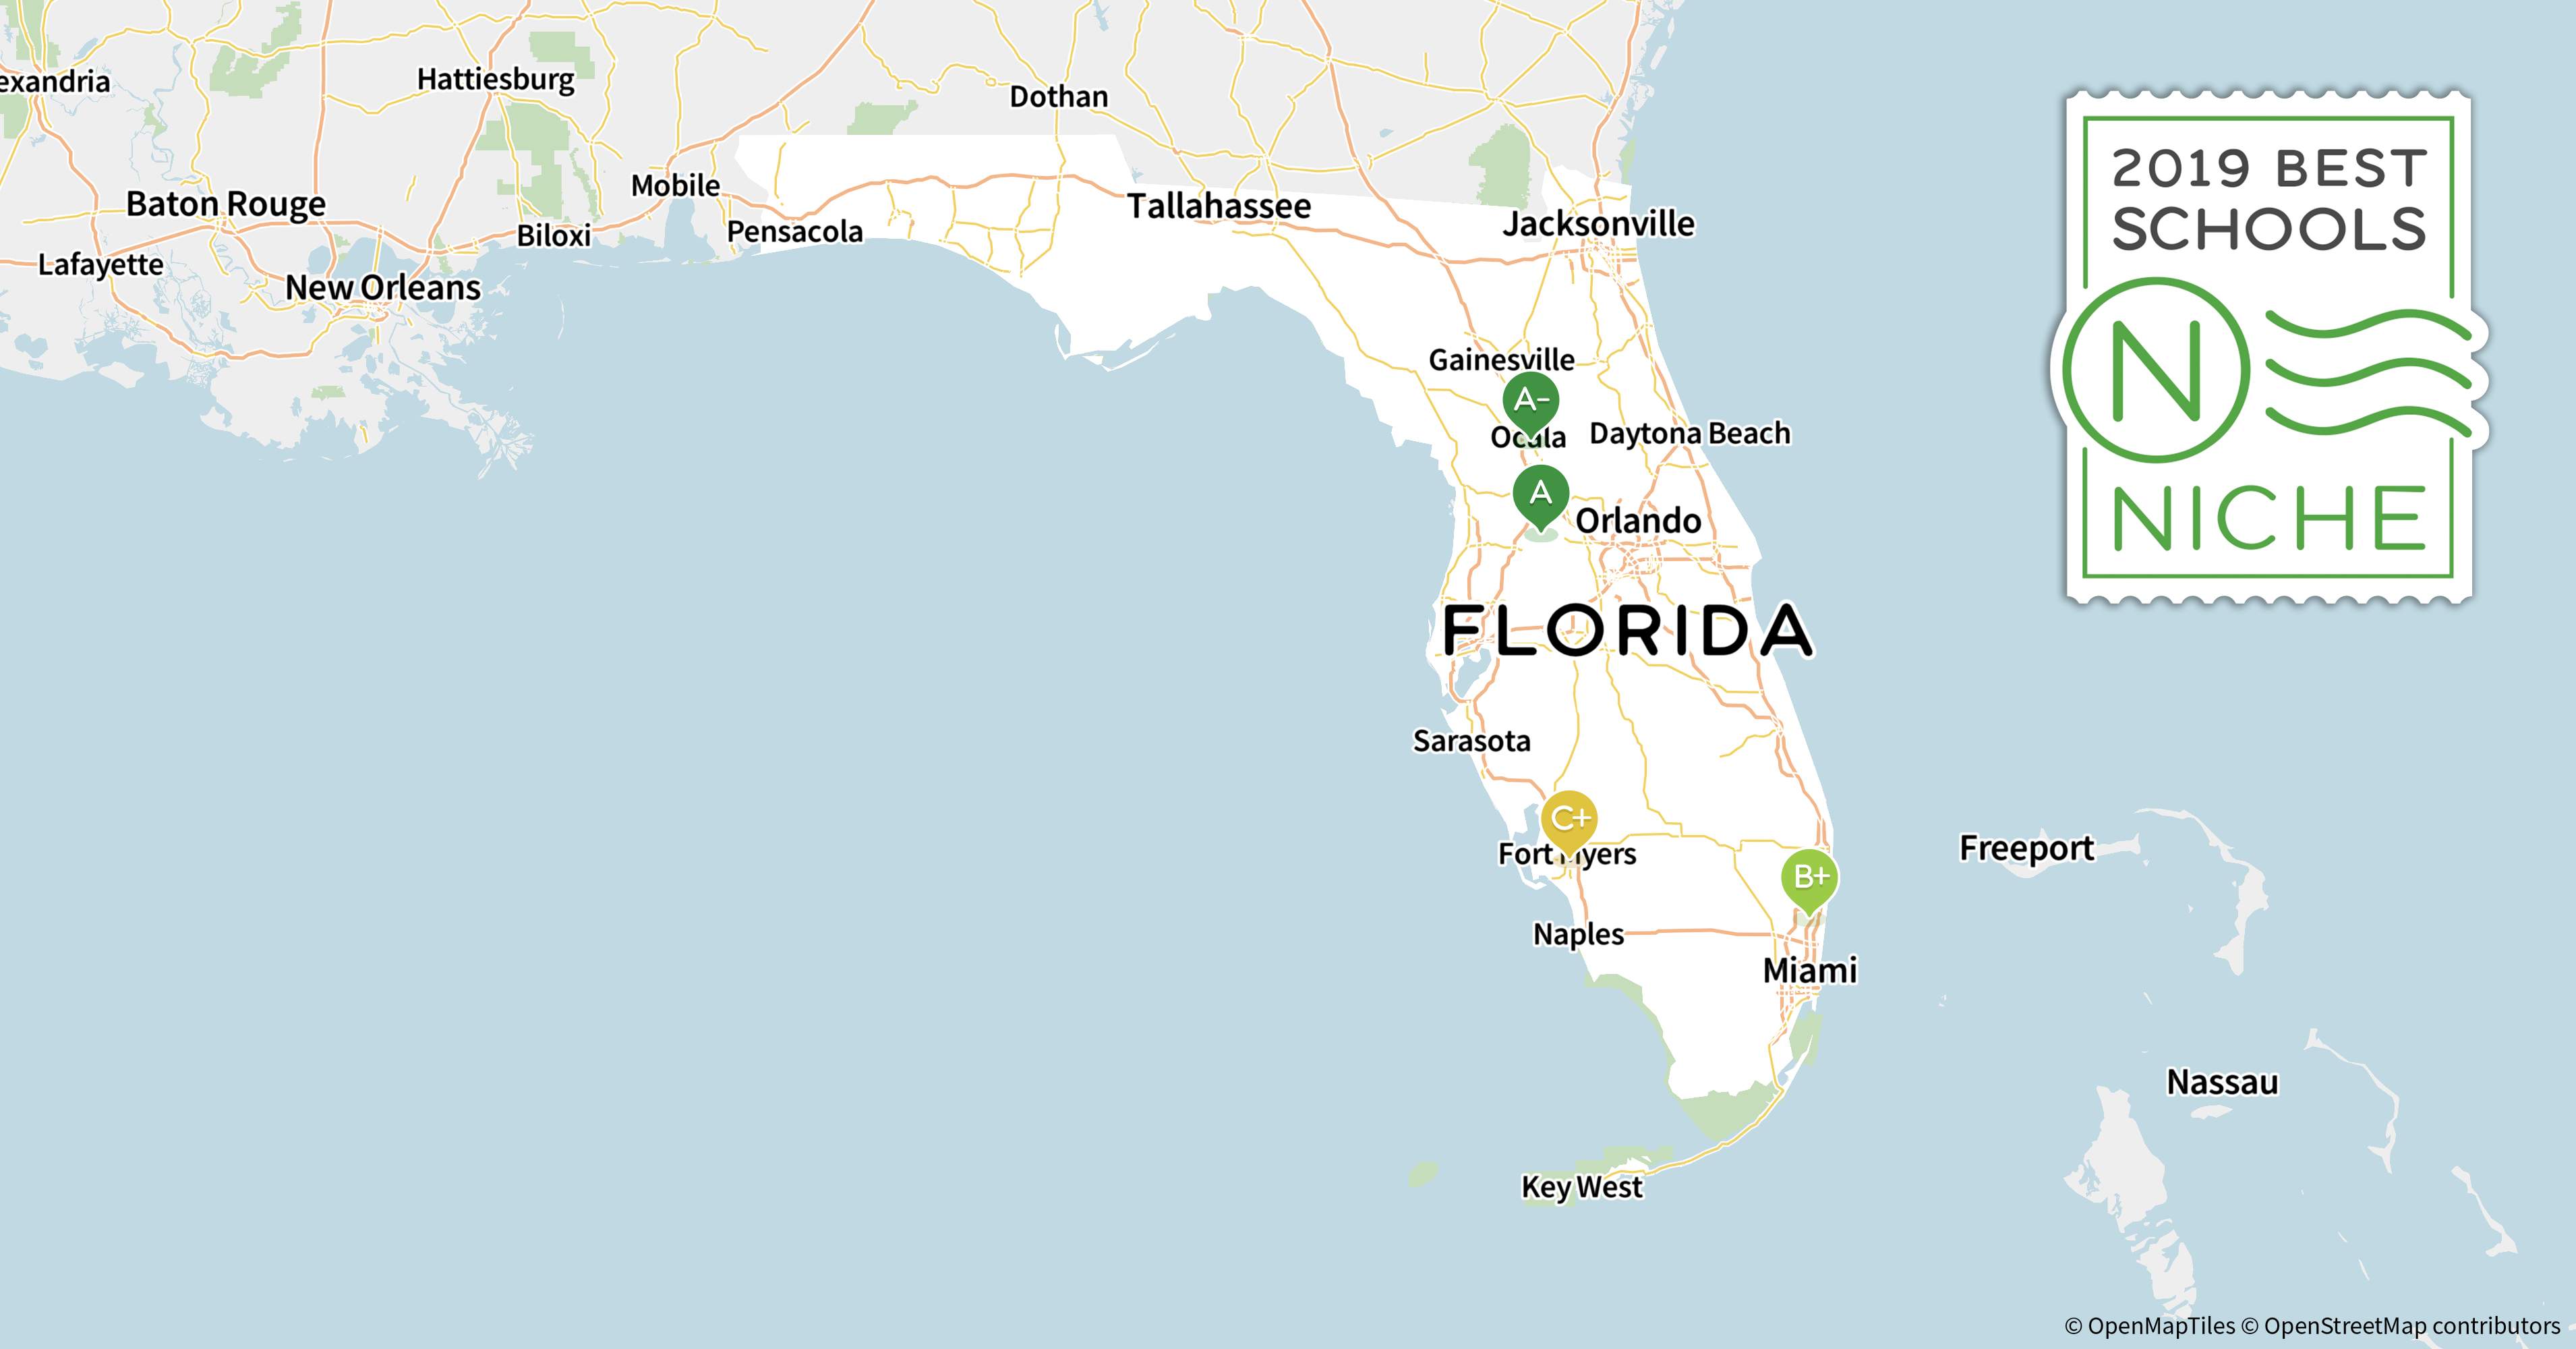 2019 Best School Districts In Florida - Niche - Florida School Districts Map